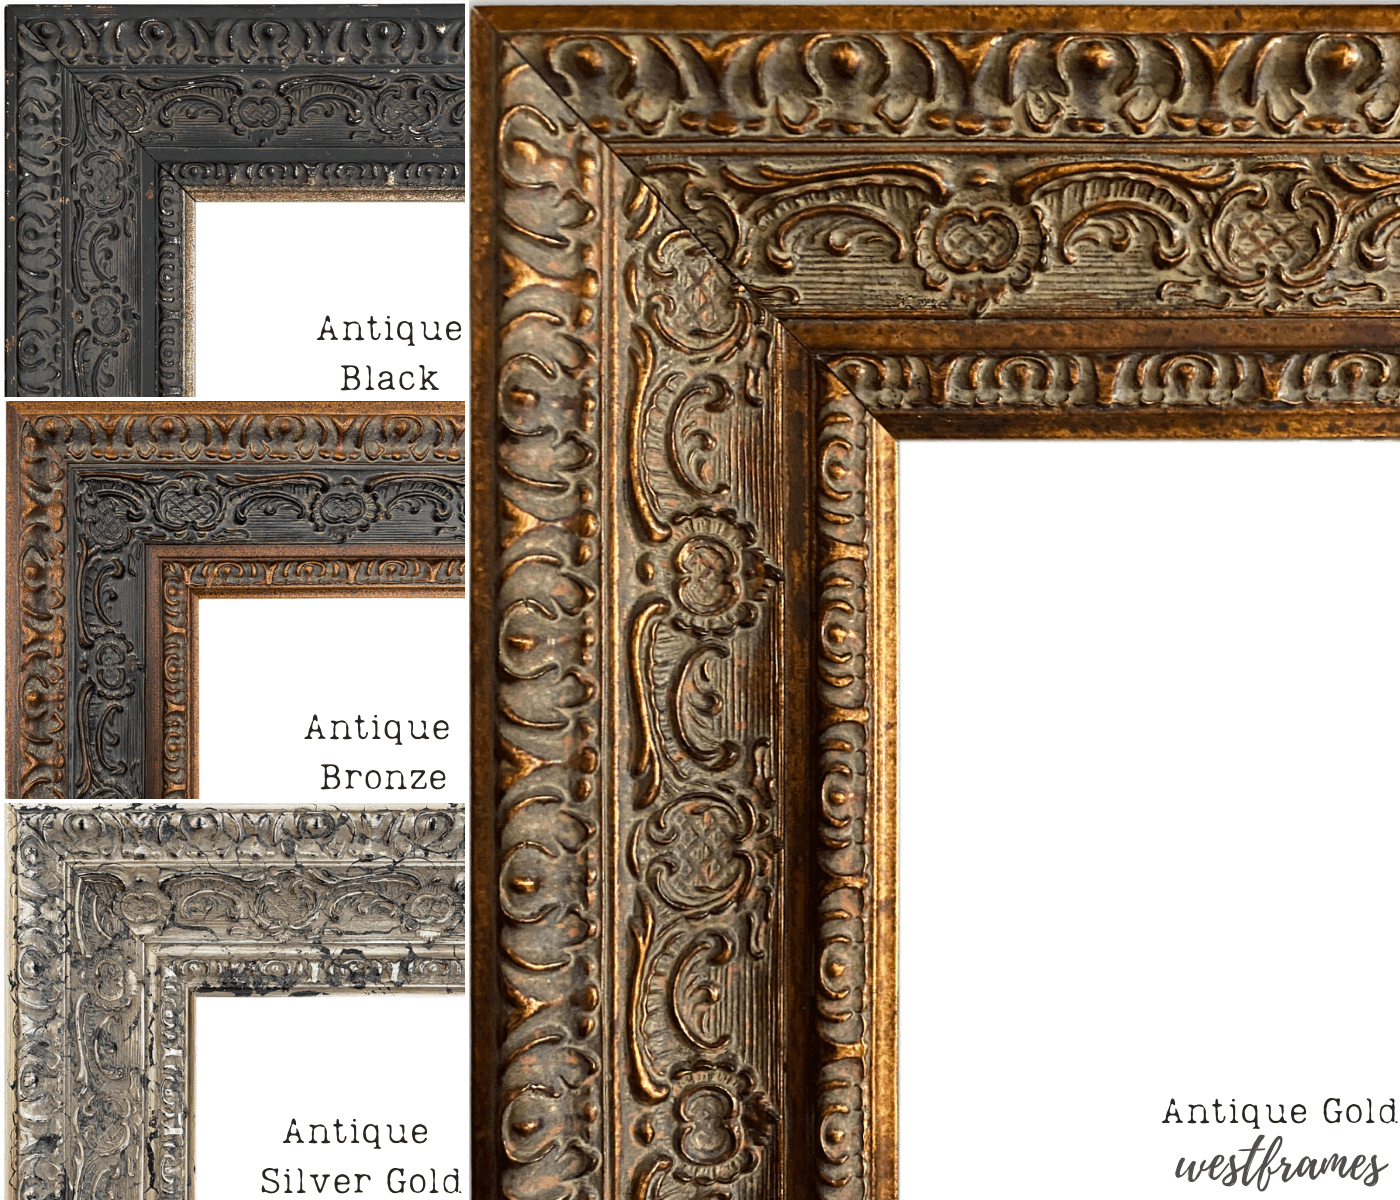 Parisienne Ornate Embossed Wood Picture Frame Antique Gold Patina Finish 3" Wide - West Frames